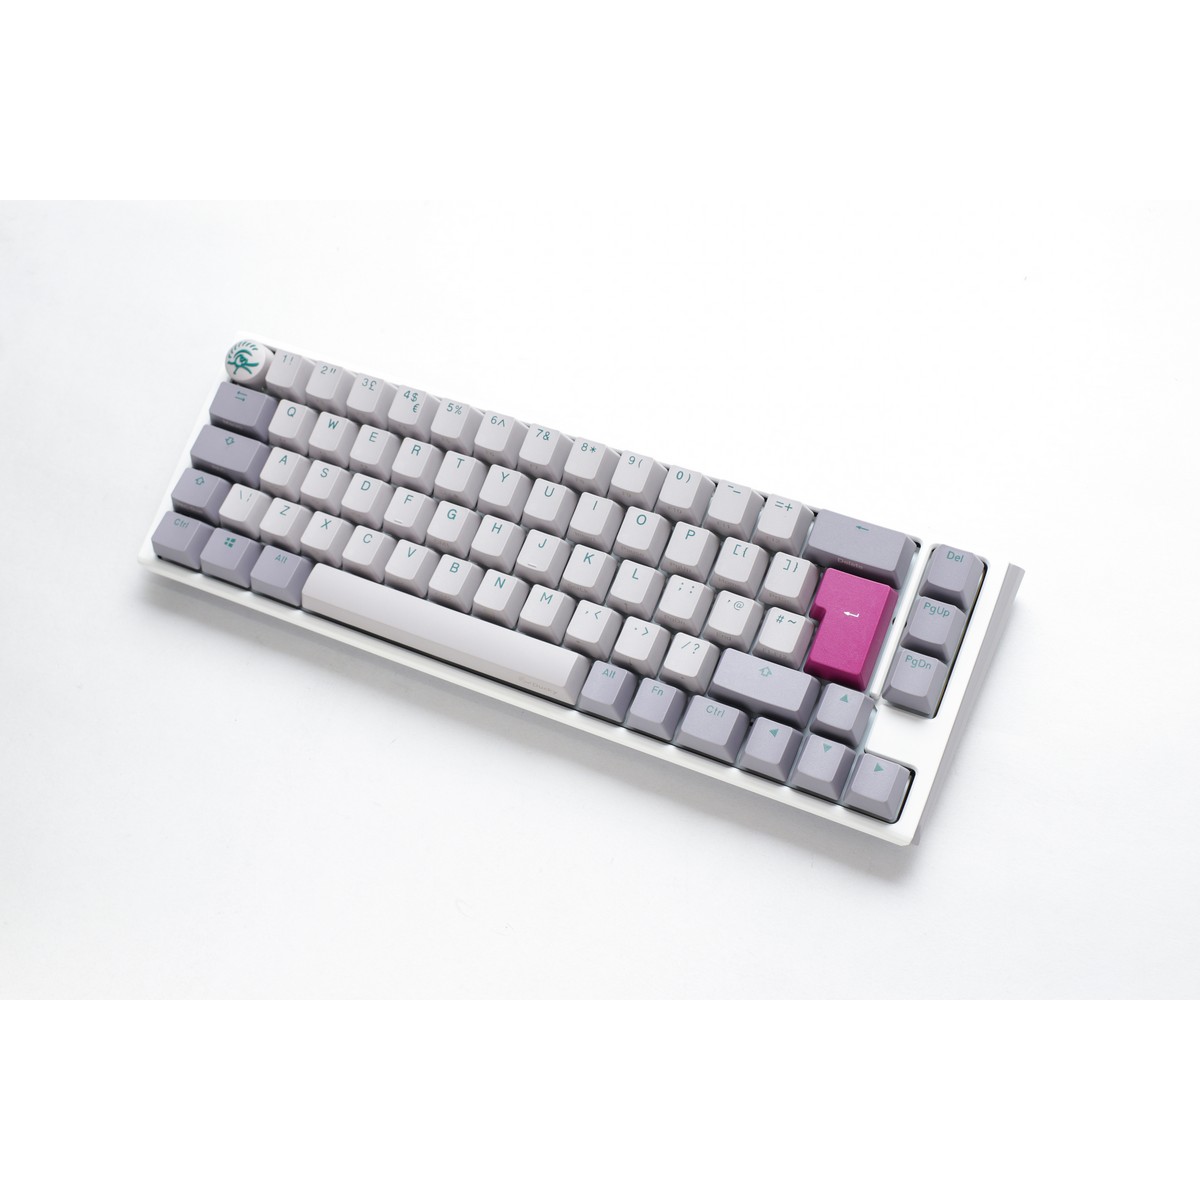 Ducky - Ducky One 3 Mist SF 65% USB RGB Mechanical Gaming Keyboard Cherry MX Silent Red Switch - UK Layout